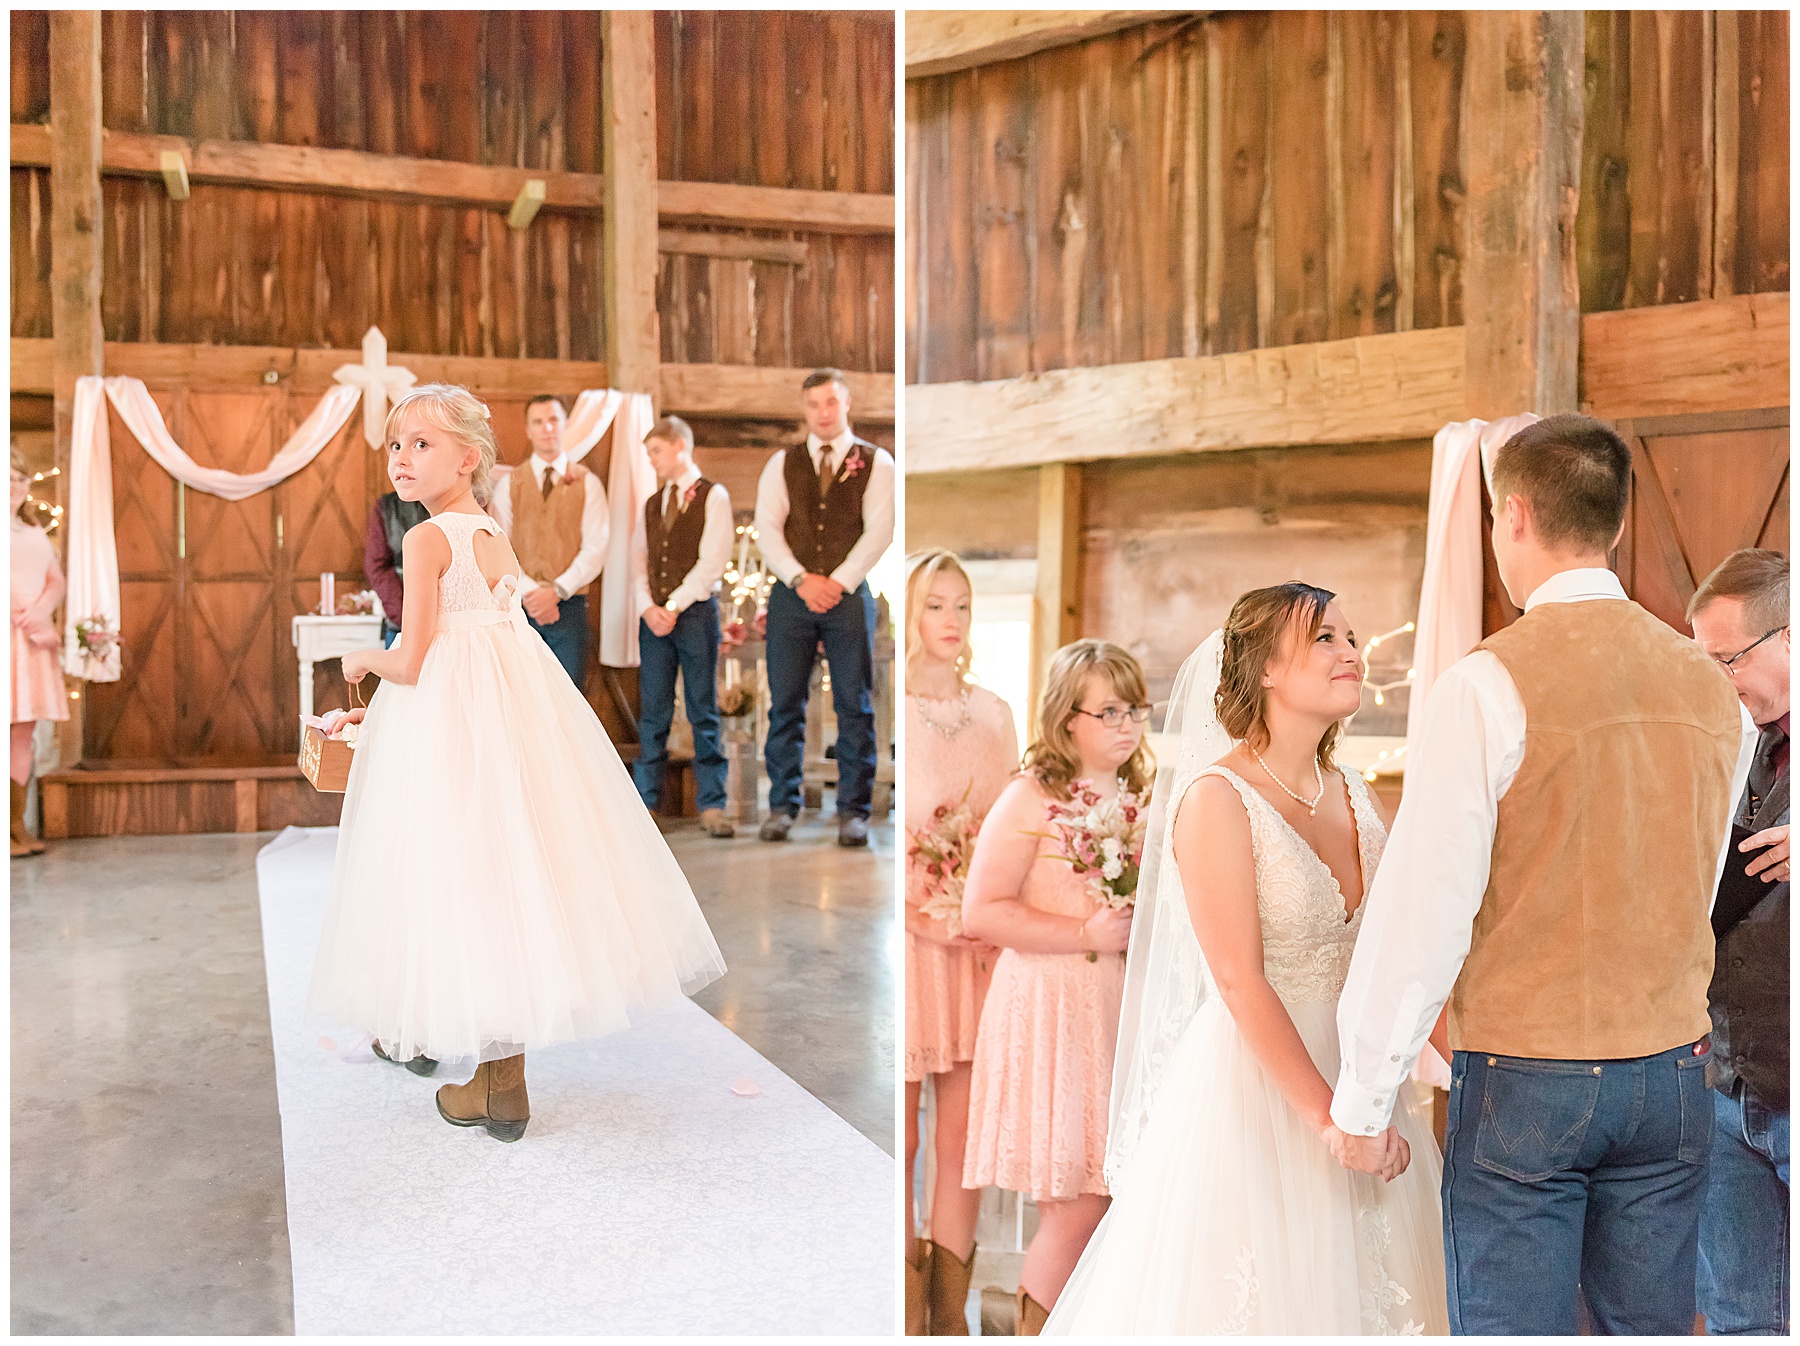 Bride smiling up at groom while holding hands in barn wedding